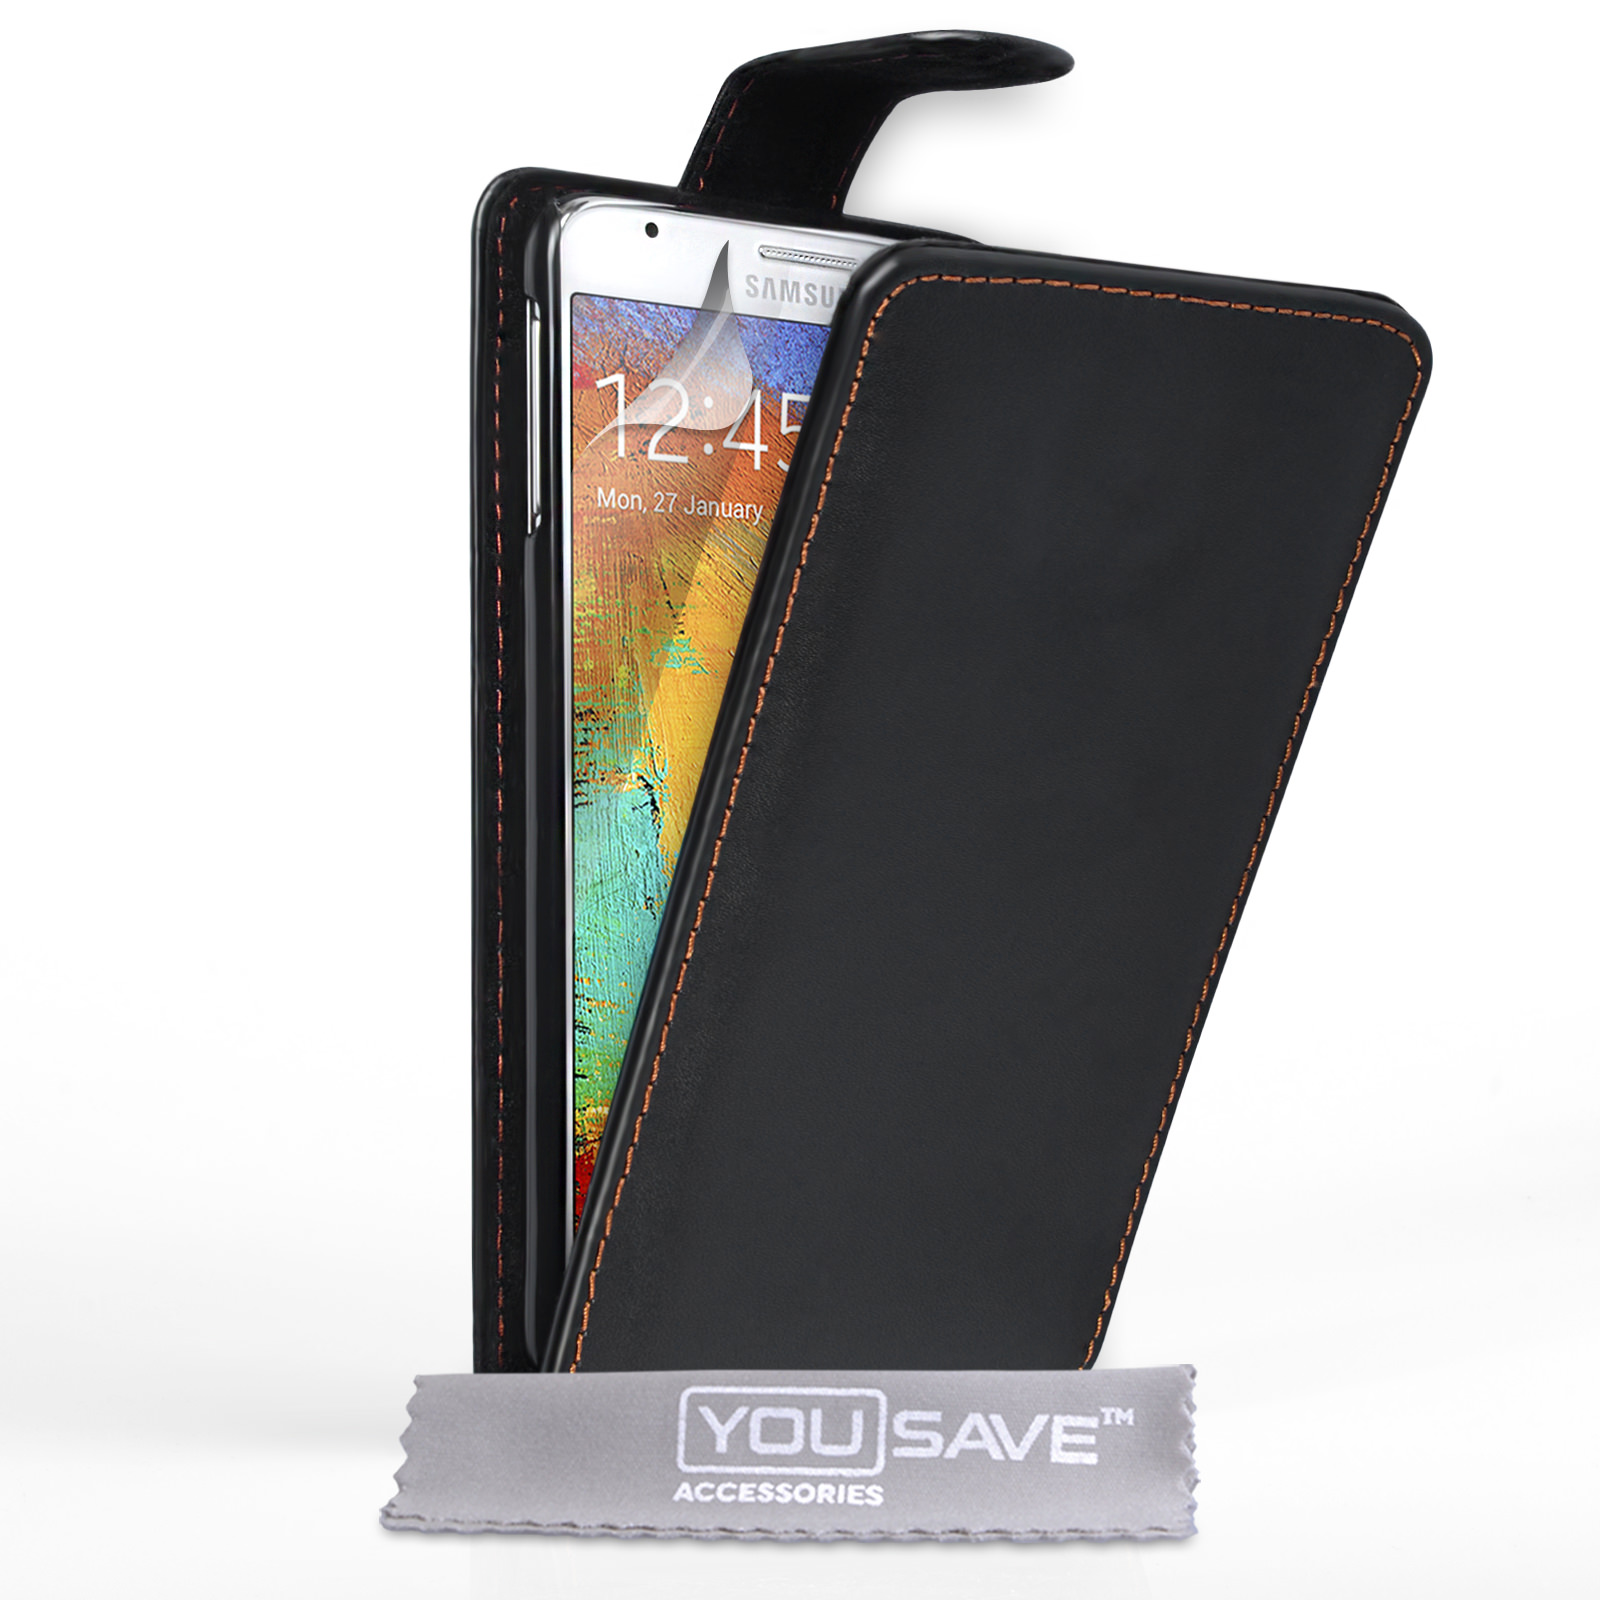 YouSave Samsung Galaxy Note 3 Neo Leather-Effect Flip Case - Black